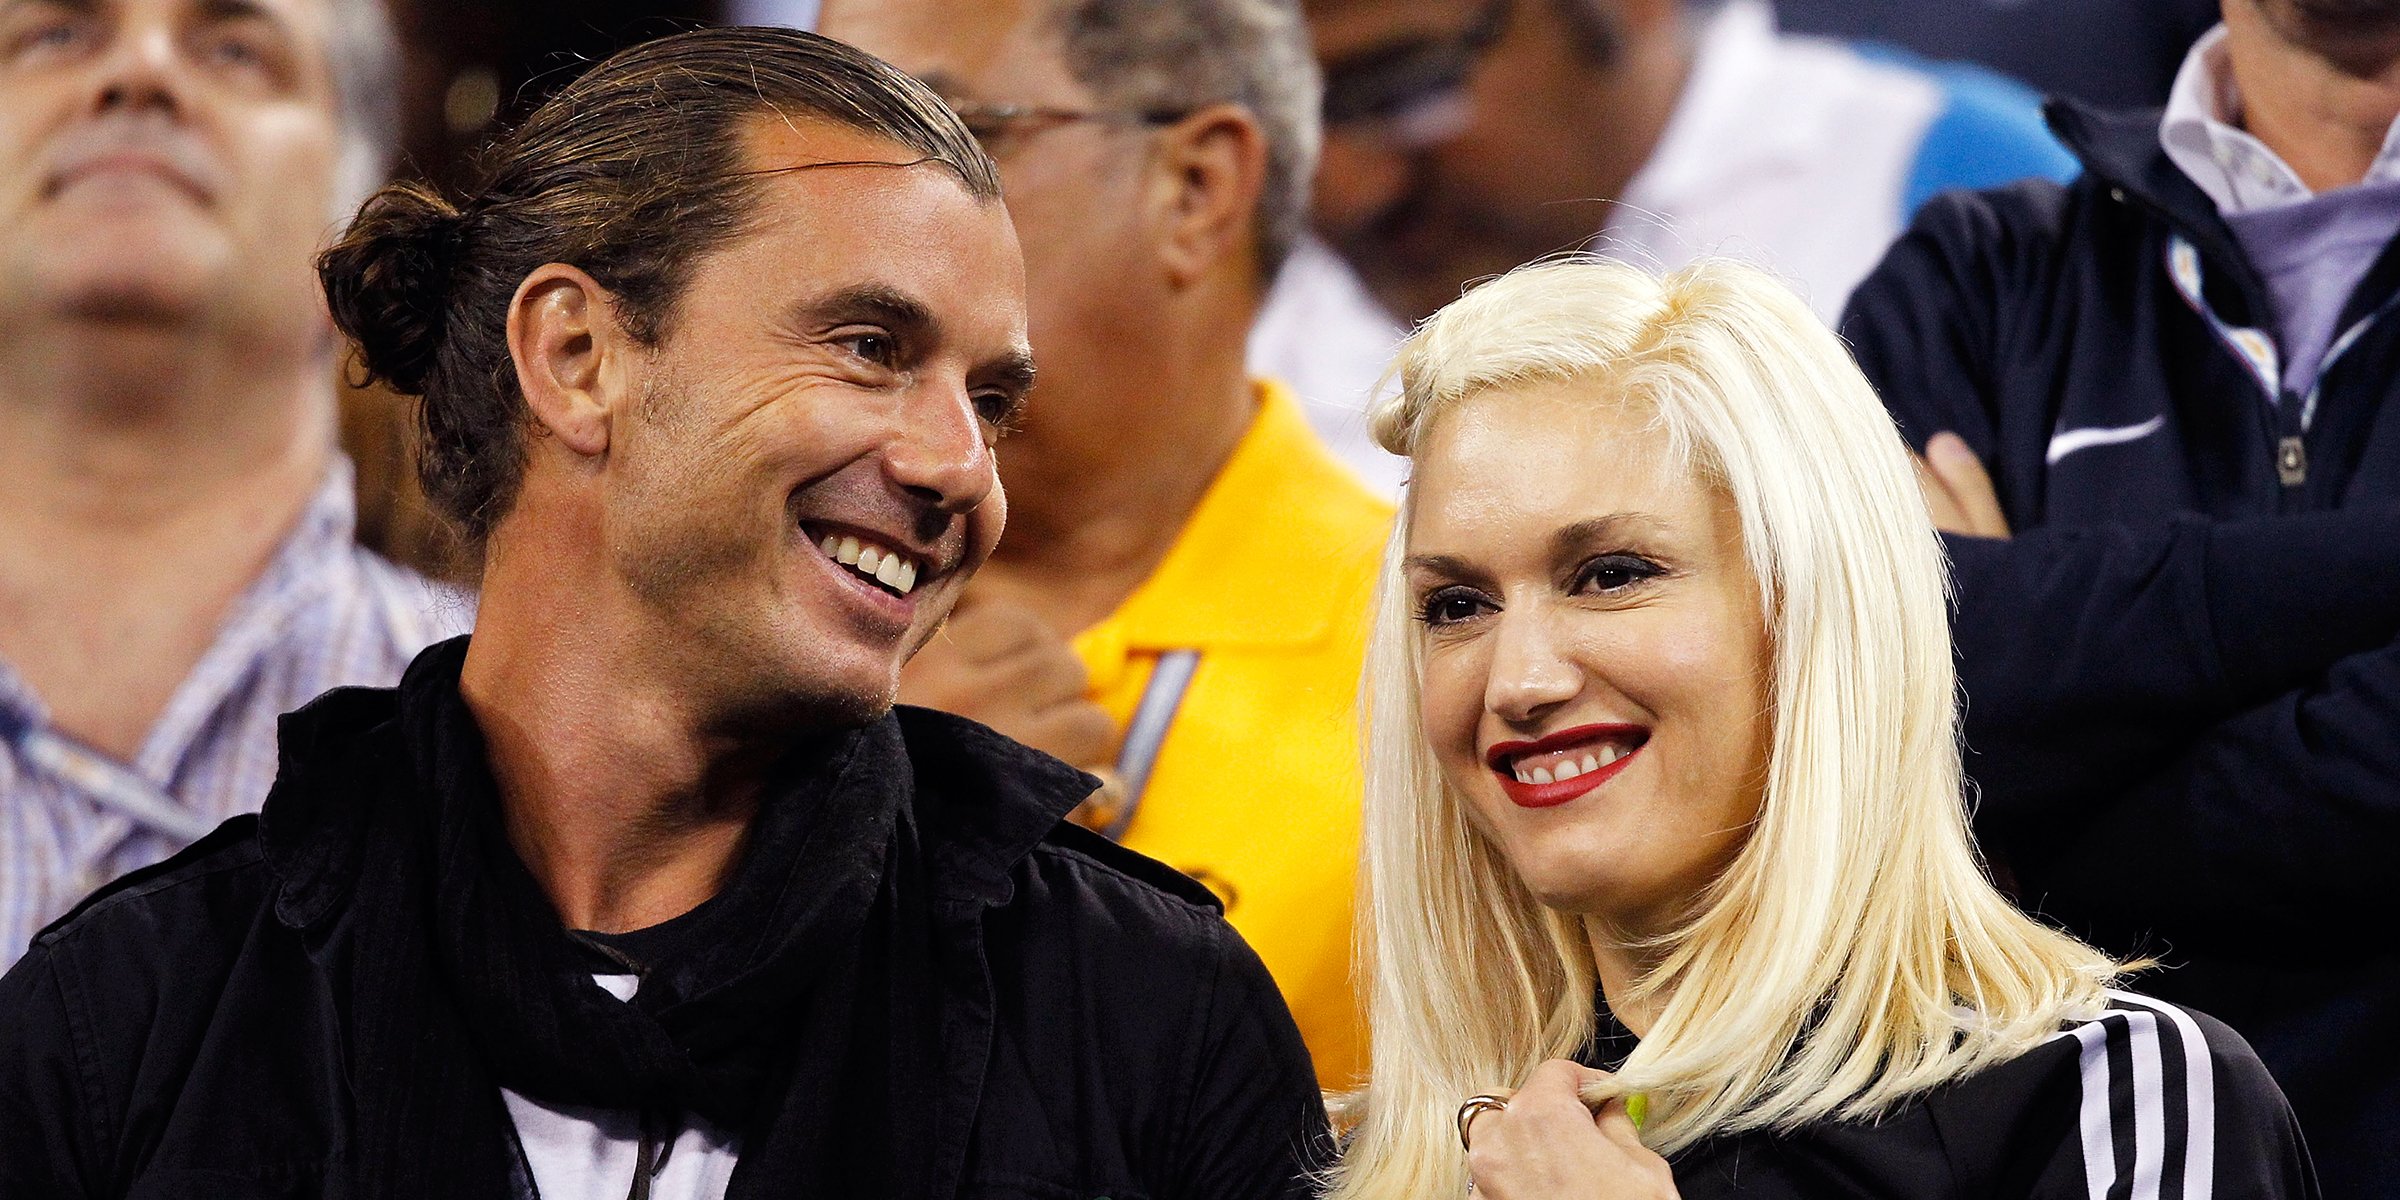 Gavin Rossdale and Gwen Stefani, 2010 | Source: Getty Images